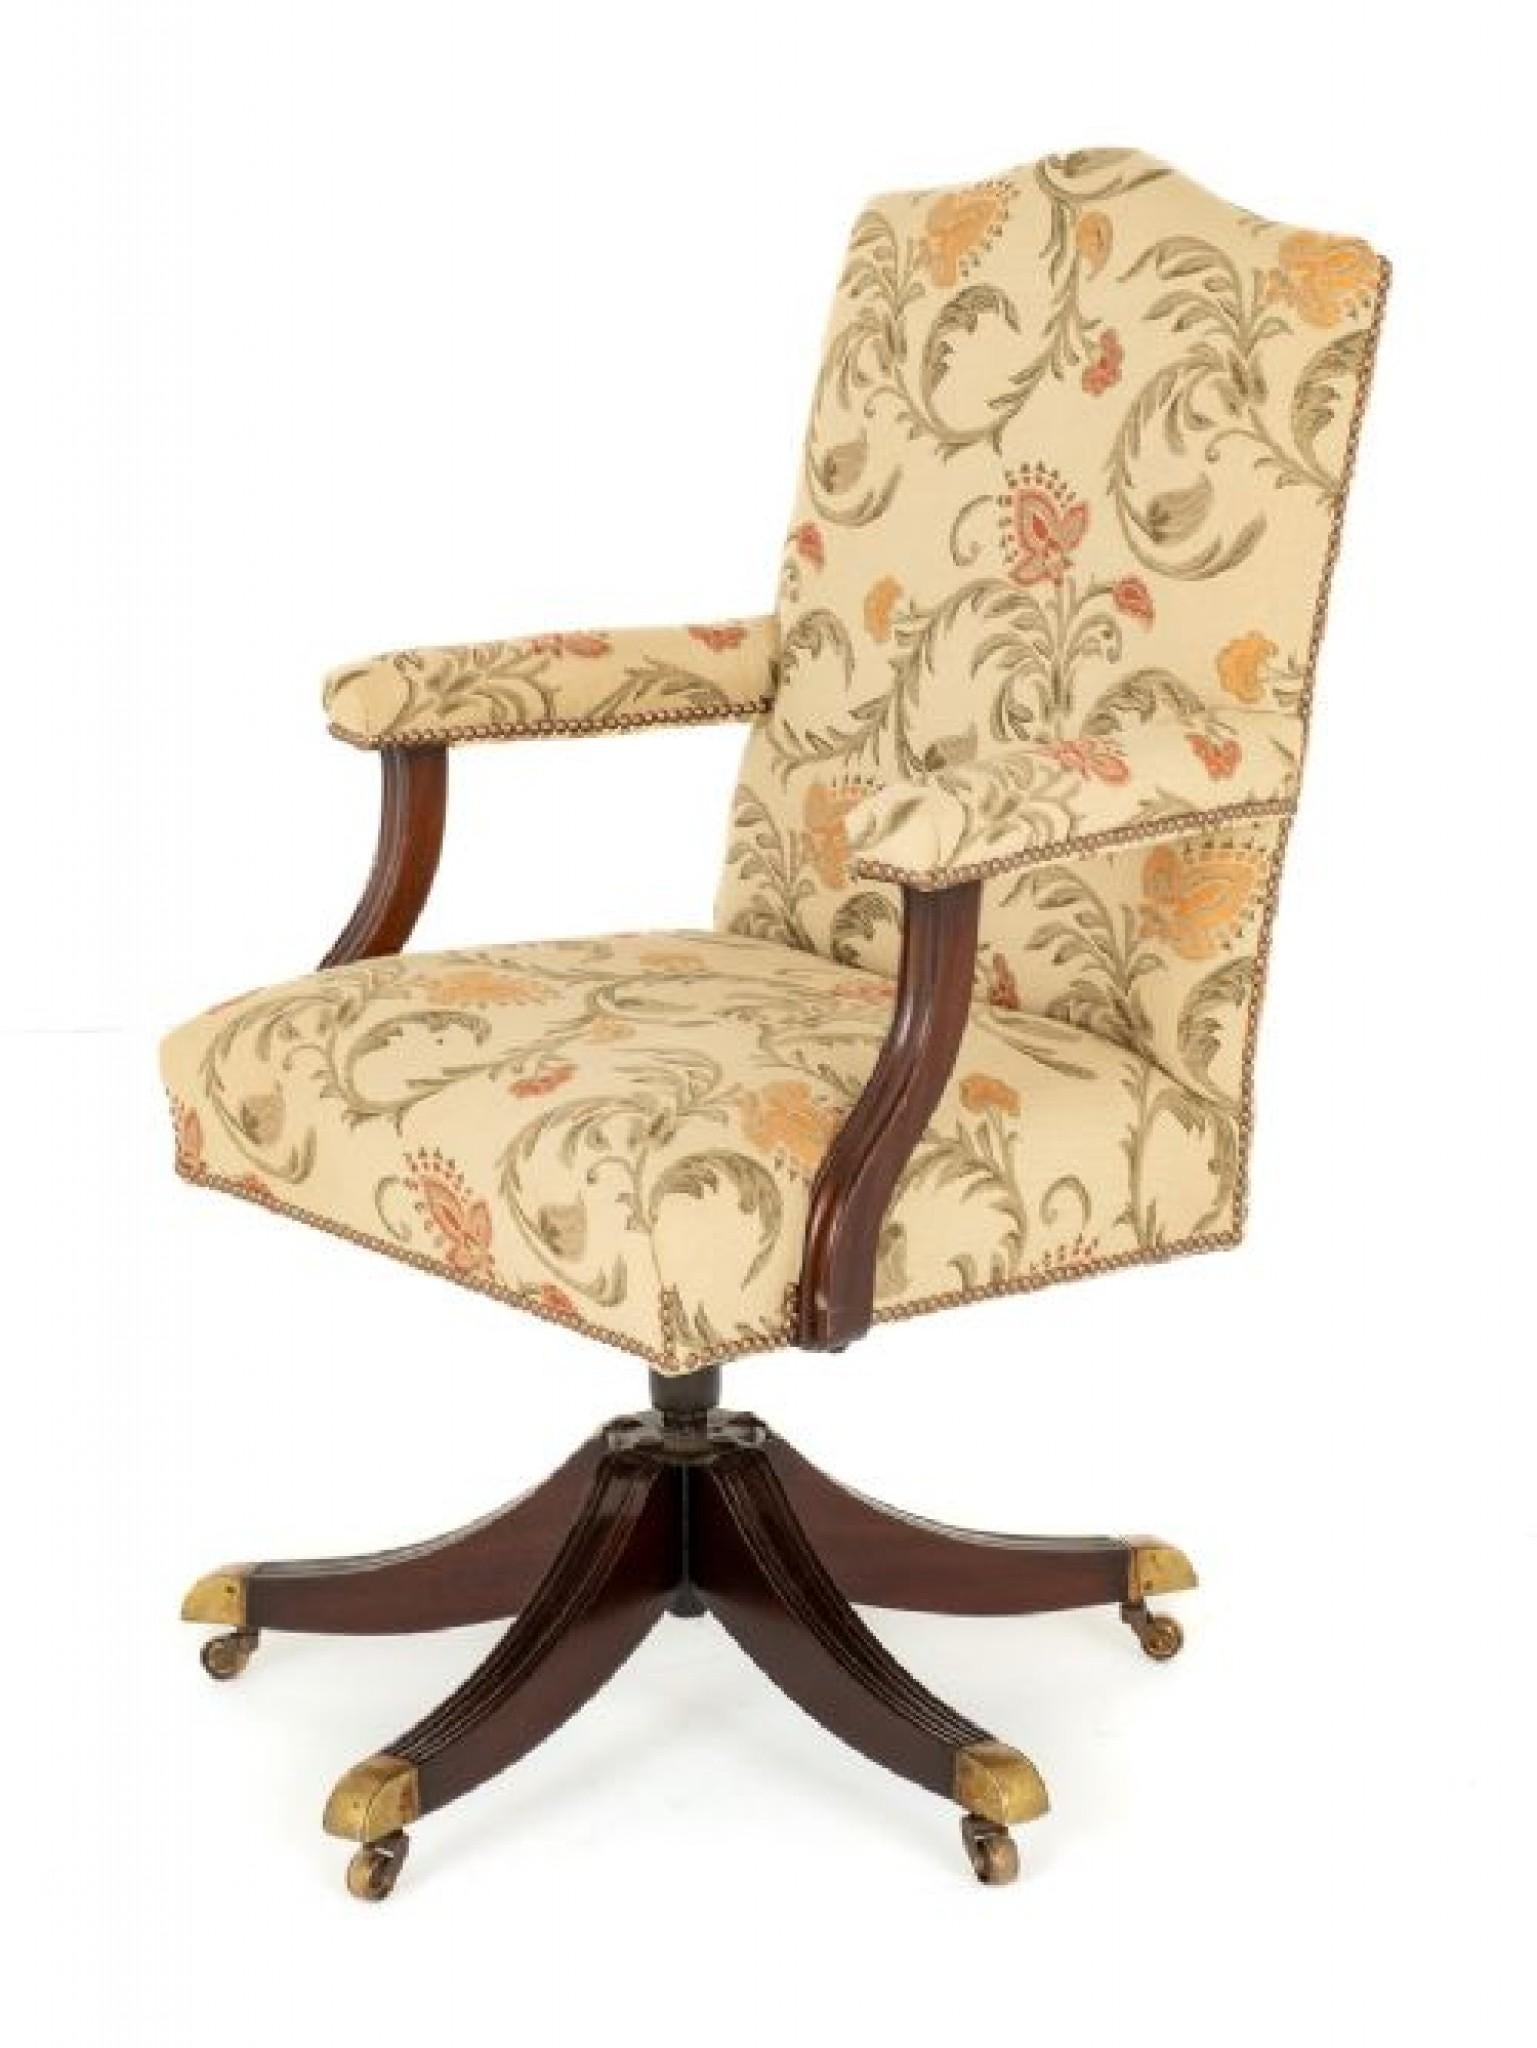 Regency Revival Mahogany Swivel Office Chair.
Circa 1930
This Office Chair Standf Upon Shaped and Fluted Legs with Brass Castors.
The Arm Supports Being of a Shaped Form.
The Chair Has a Tilt and Swivel Action and Has Recently Been Reupholstered